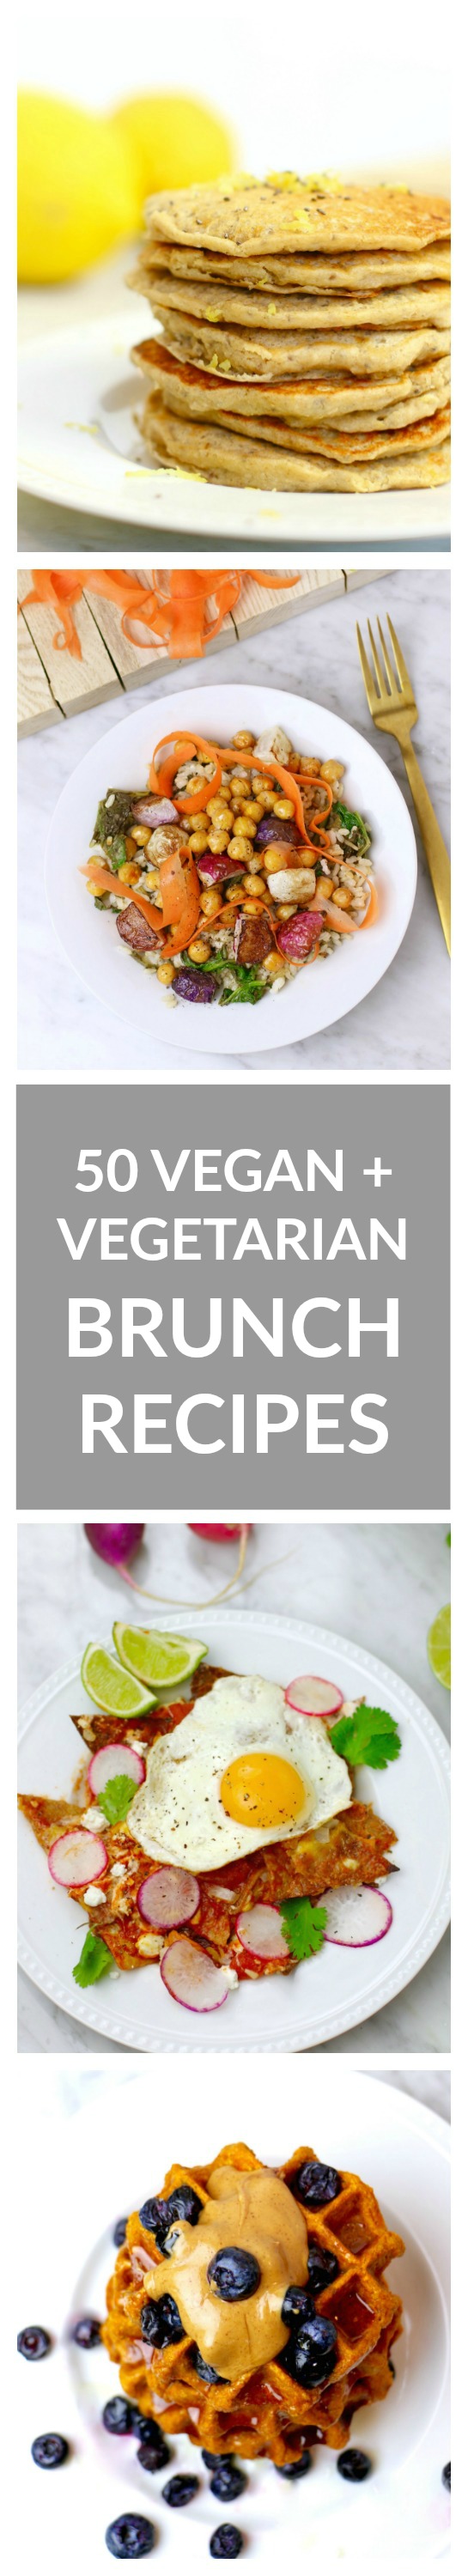 50 Vegetarian and Vegan Brunch Recipes for Mother's Day - healthy, delicious vegetarian and vegan recipes perfect for your Mother's Day brunch. #healthy #breakfast #brunch #vegan #vegetarian